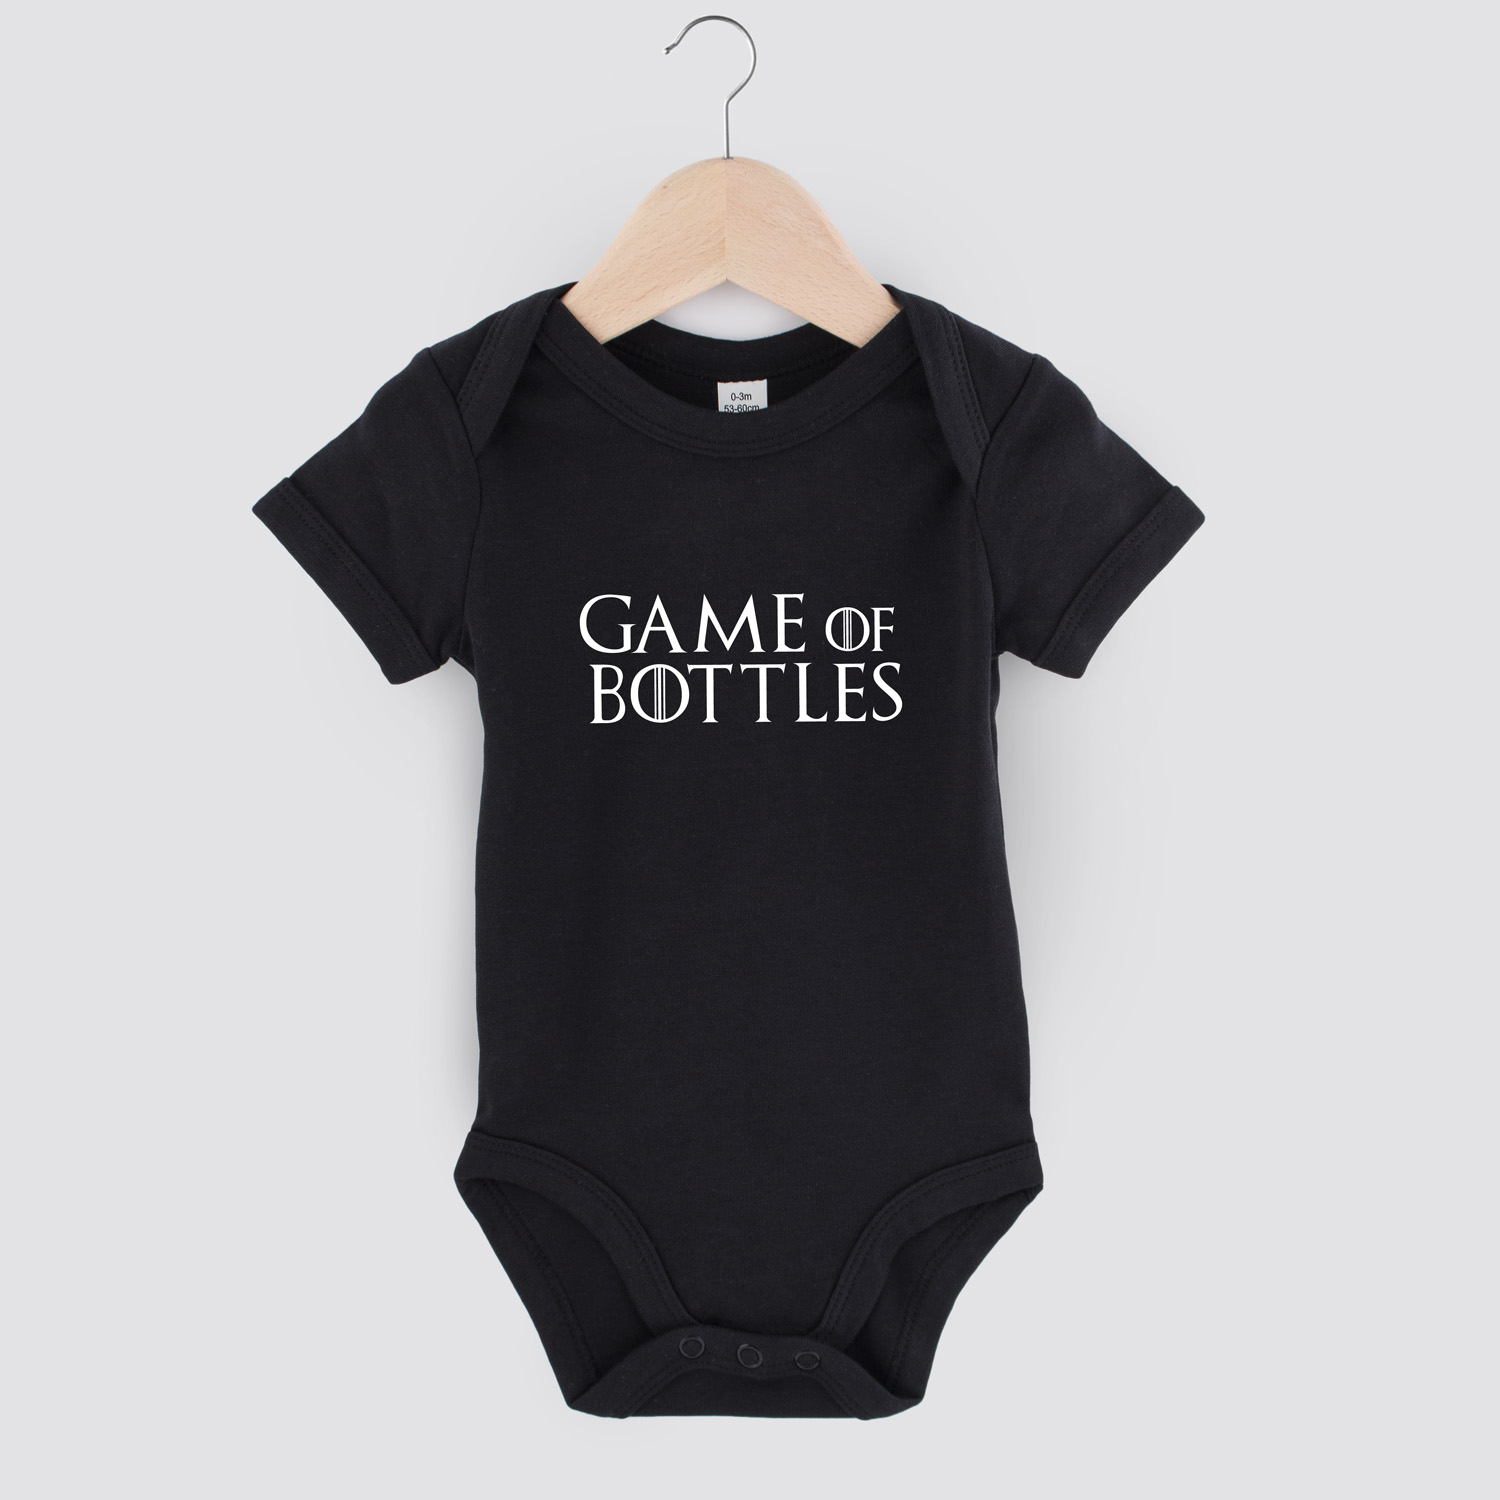 Game of bottles | Baby romper | my fabulous life.